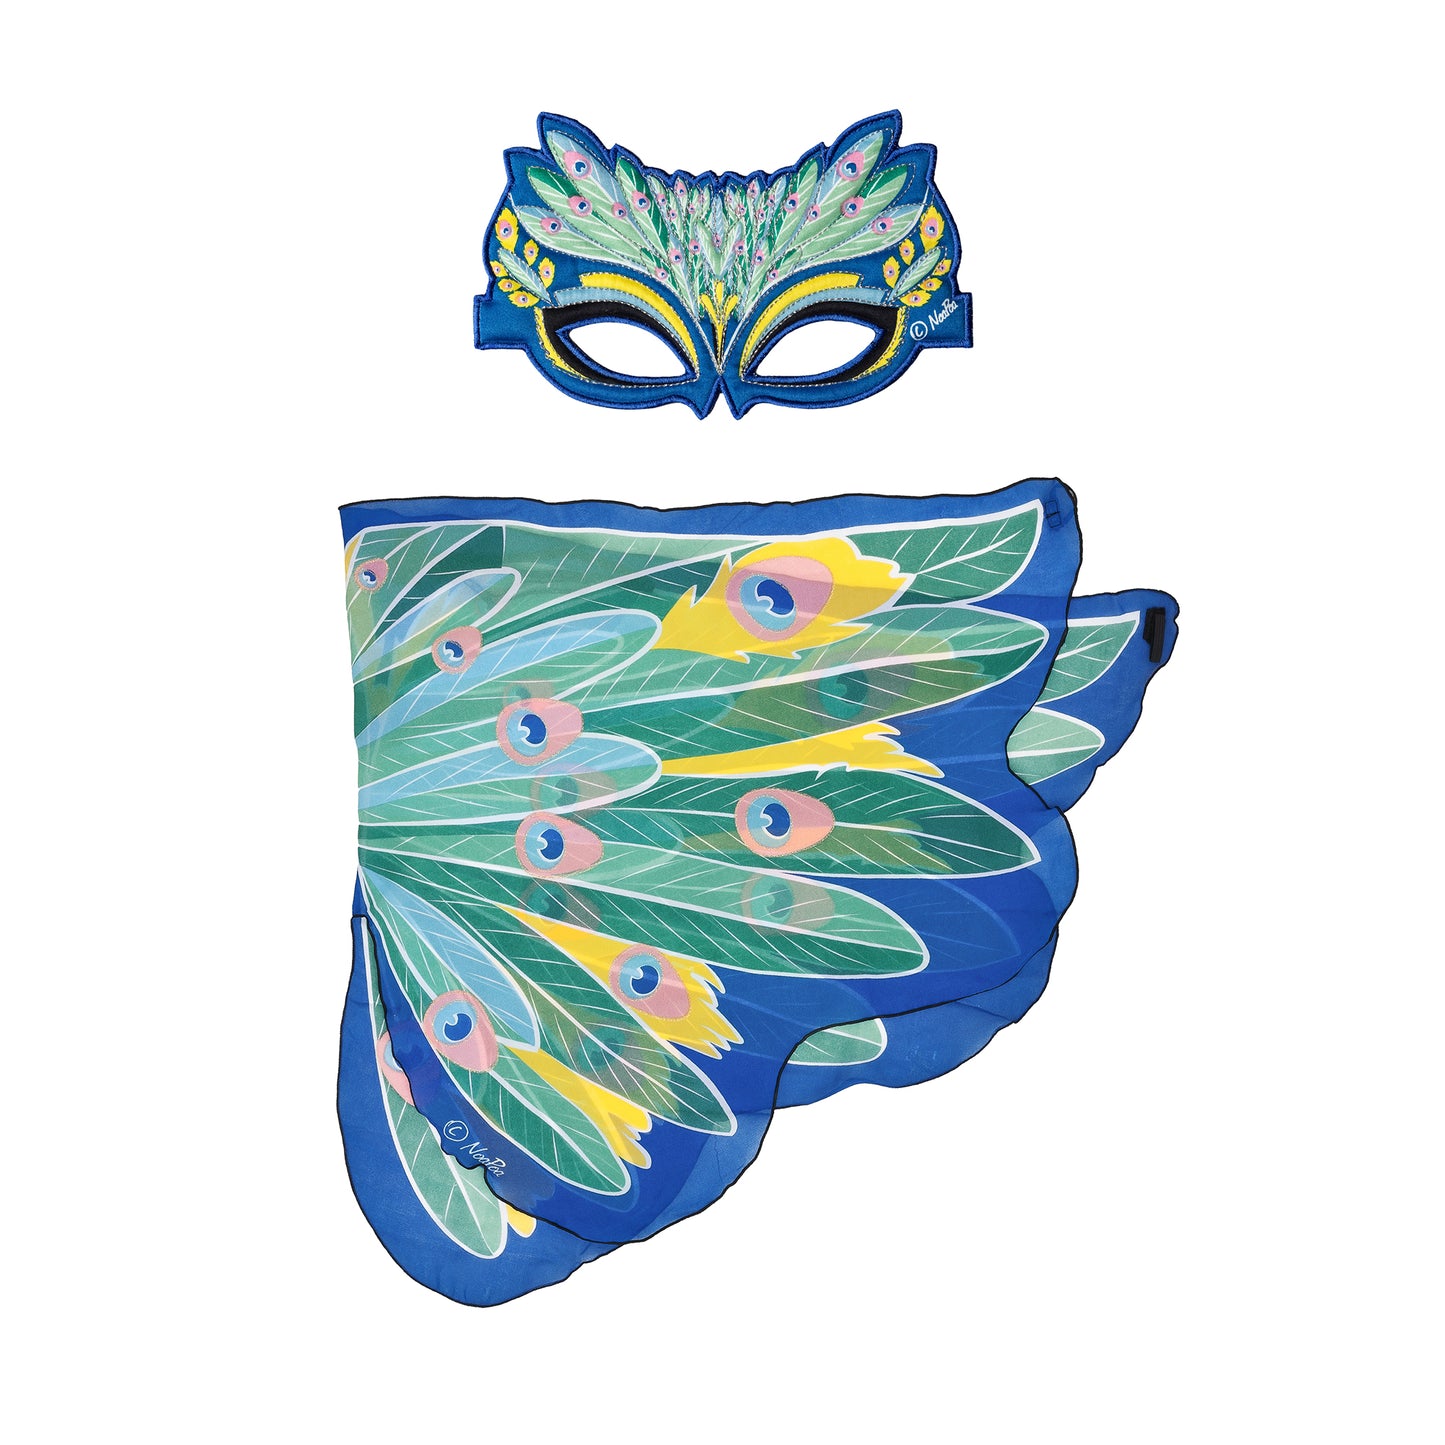 PEACOCK WINGS + MASK in eco-friendly cotton gift bag